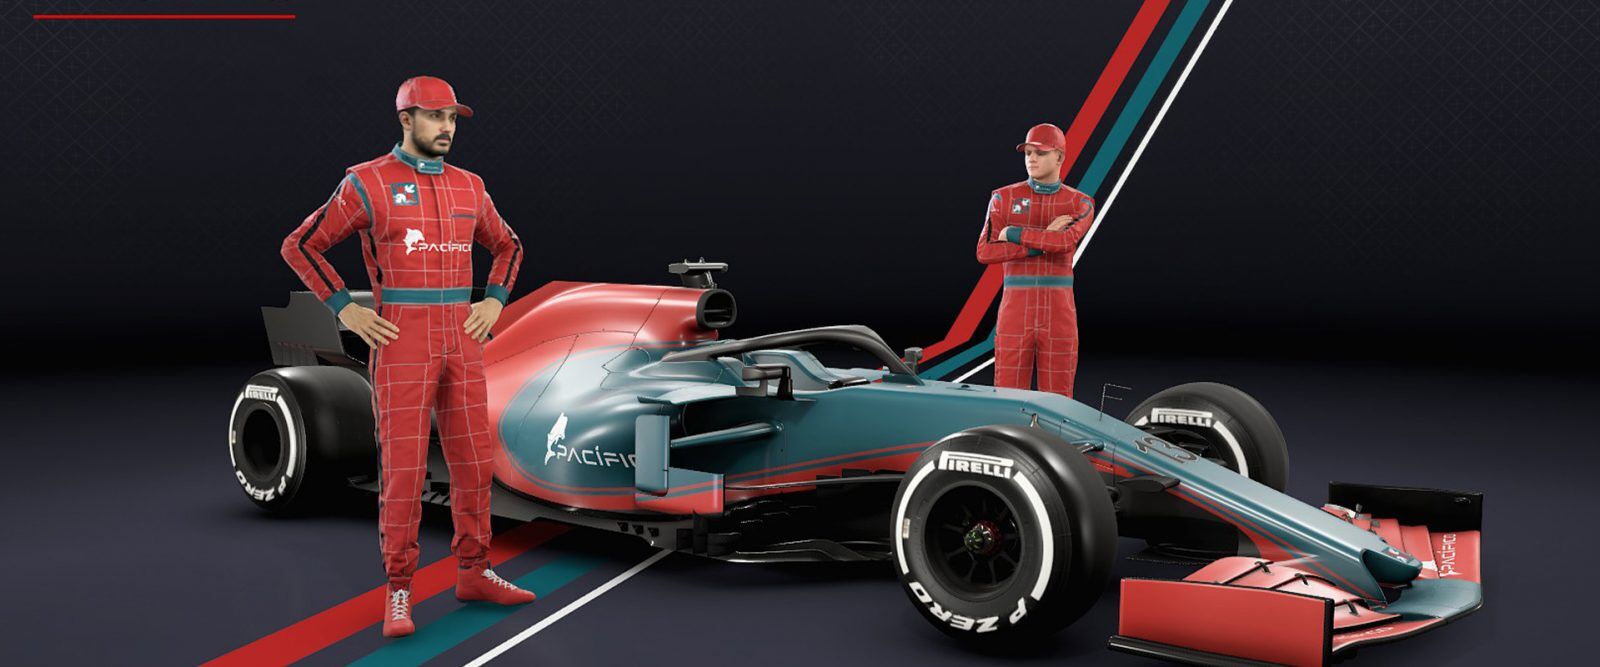 F1 2020 My Team guide: The perfect start